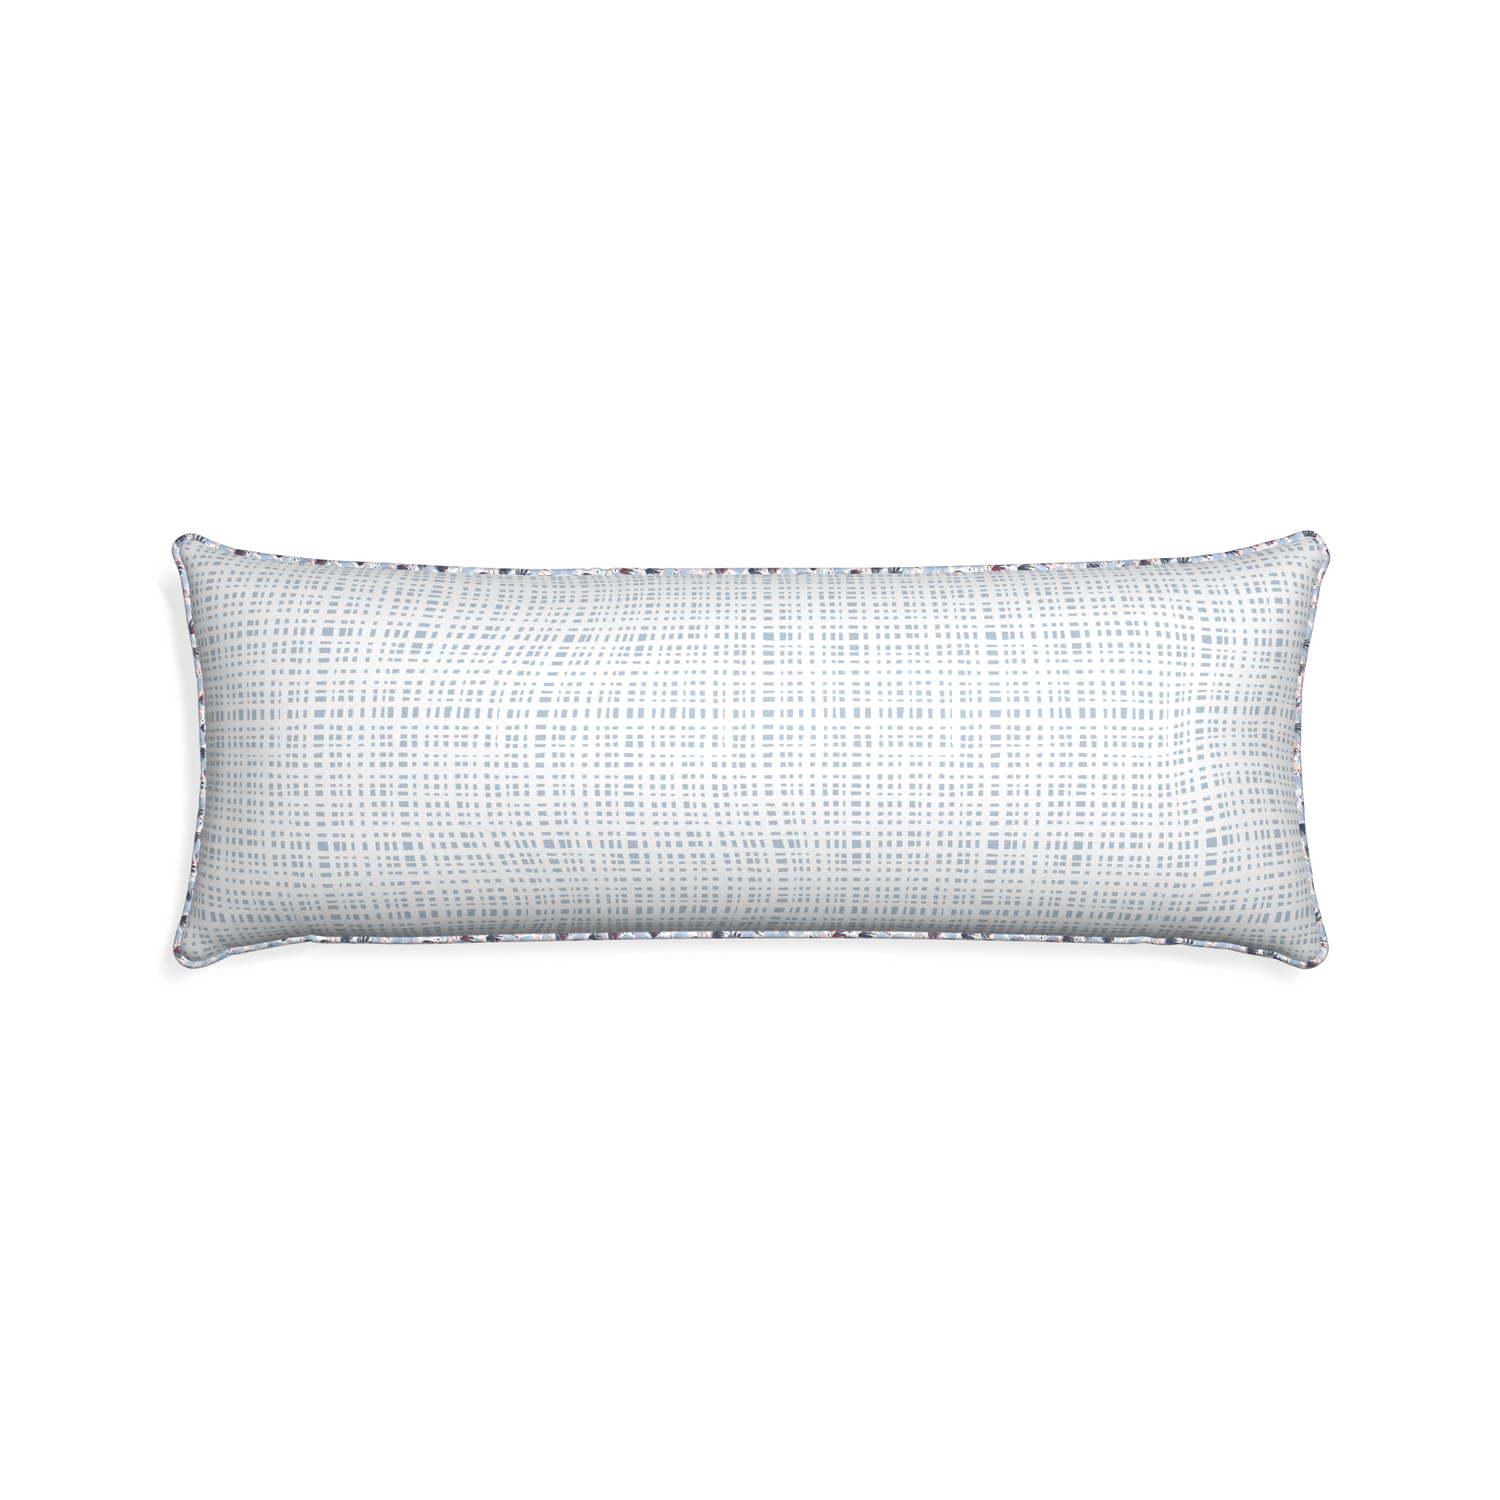 Xl-lumbar ginger sky custom pillow with e piping on white background